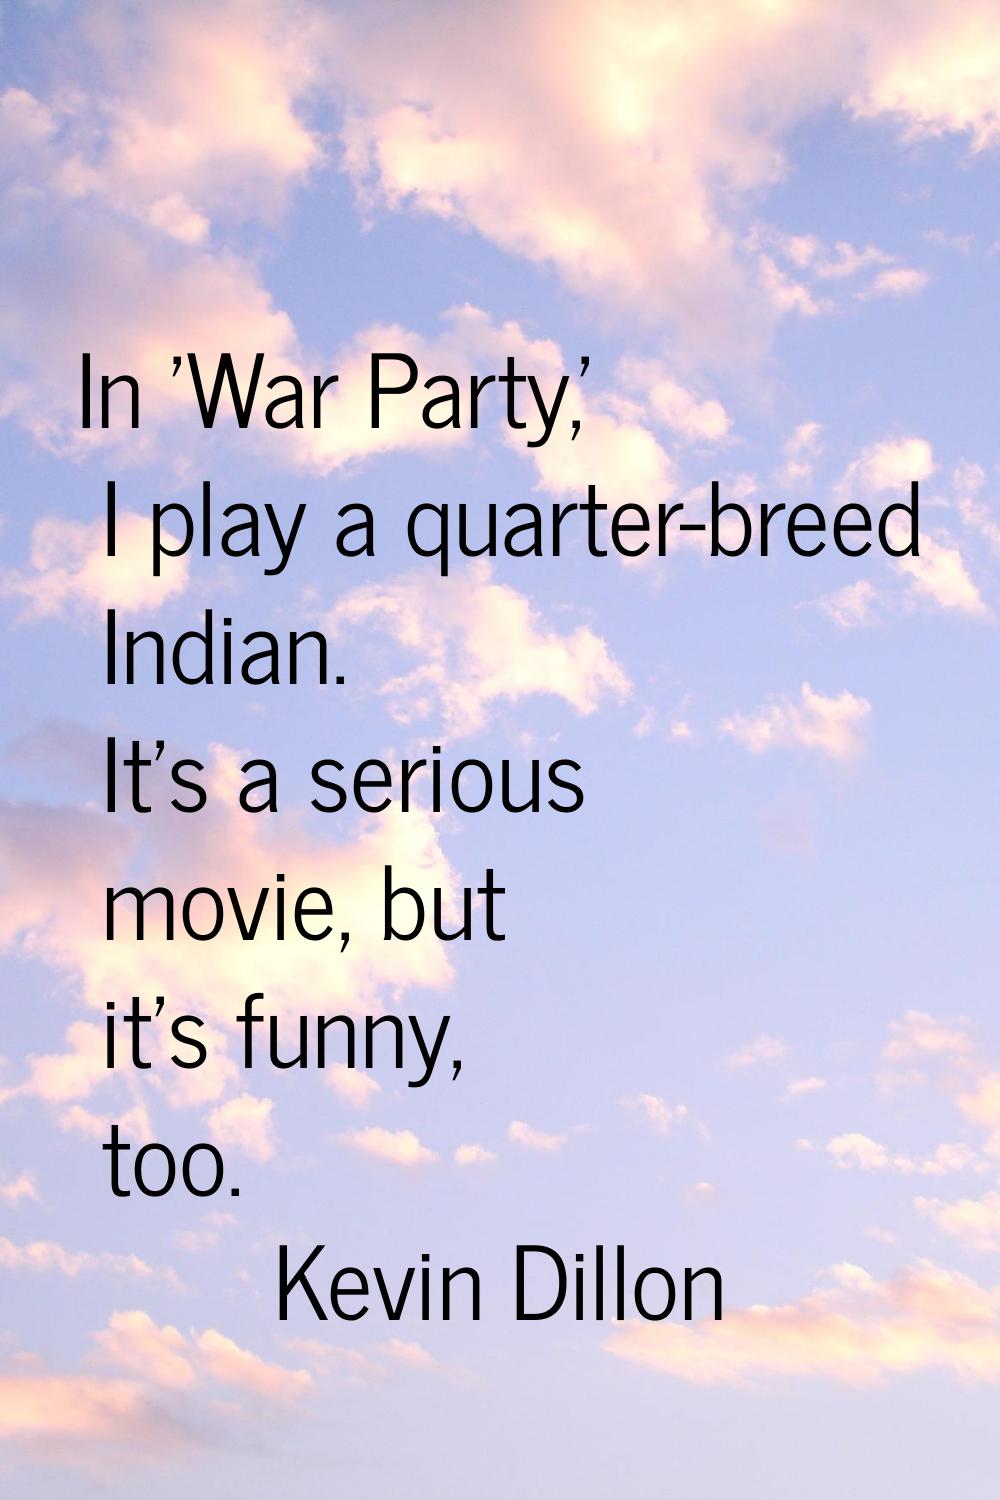 In 'War Party,' I play a quarter-breed Indian. It's a serious movie, but it's funny, too.